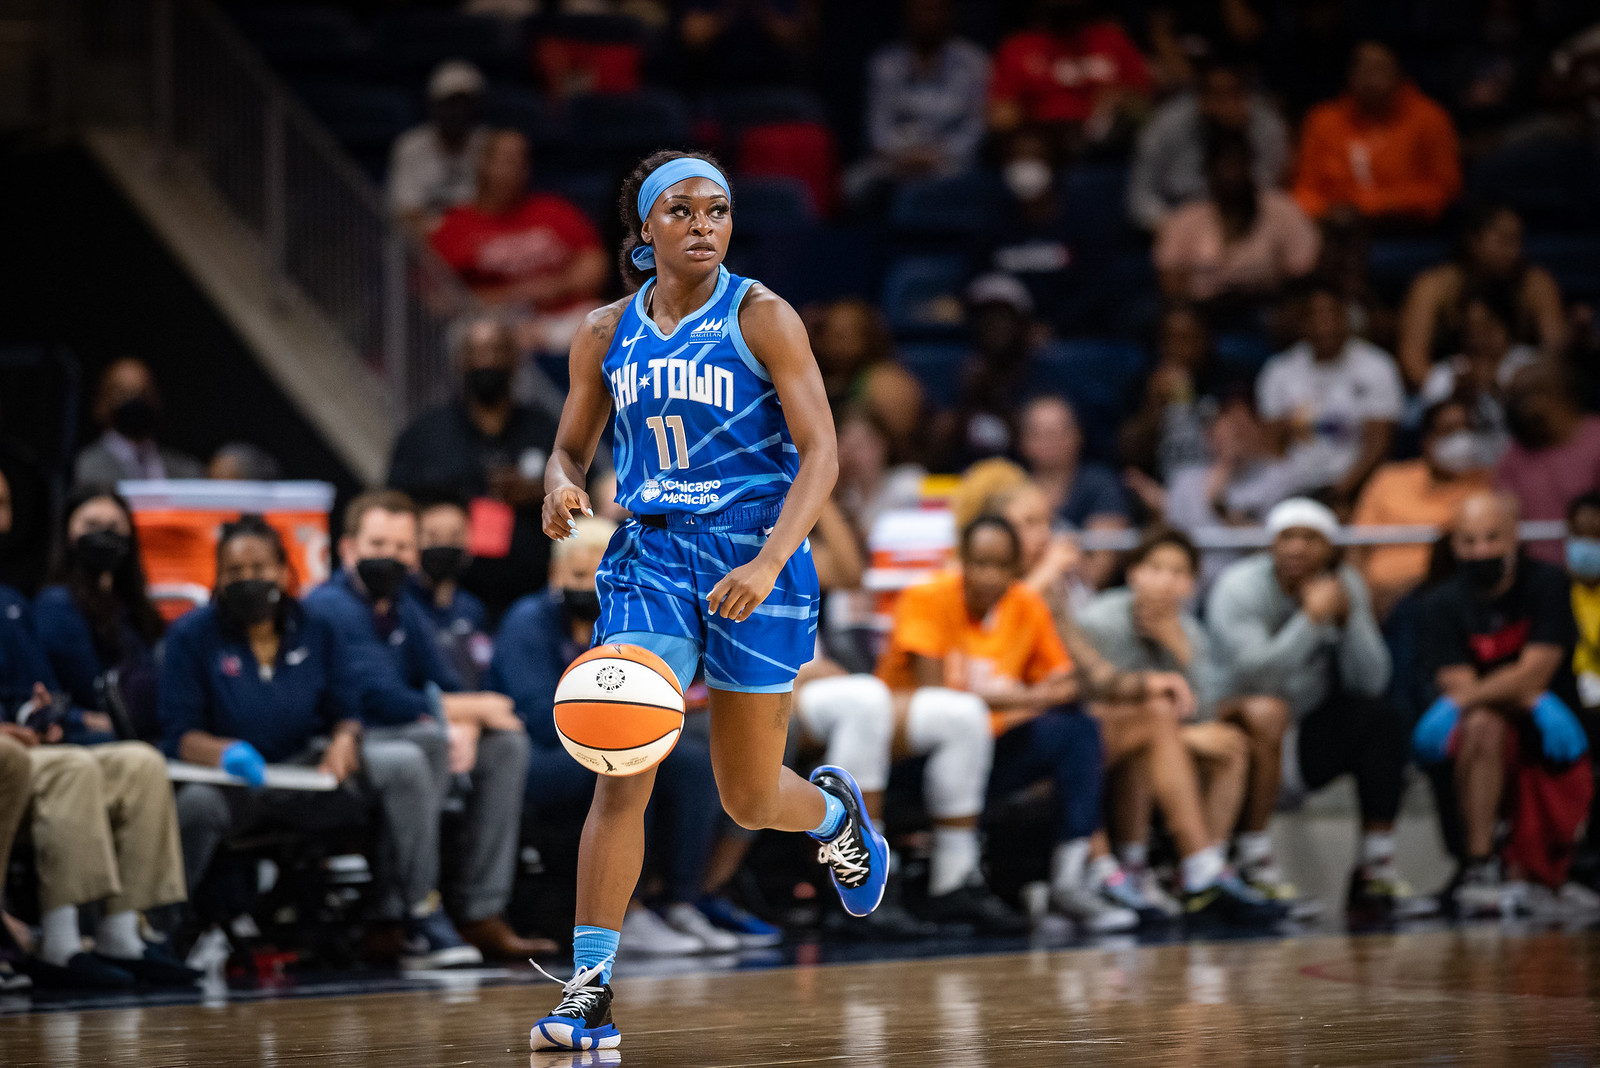 Chicago Sky: How Dana Evans is changing face of women's basketball